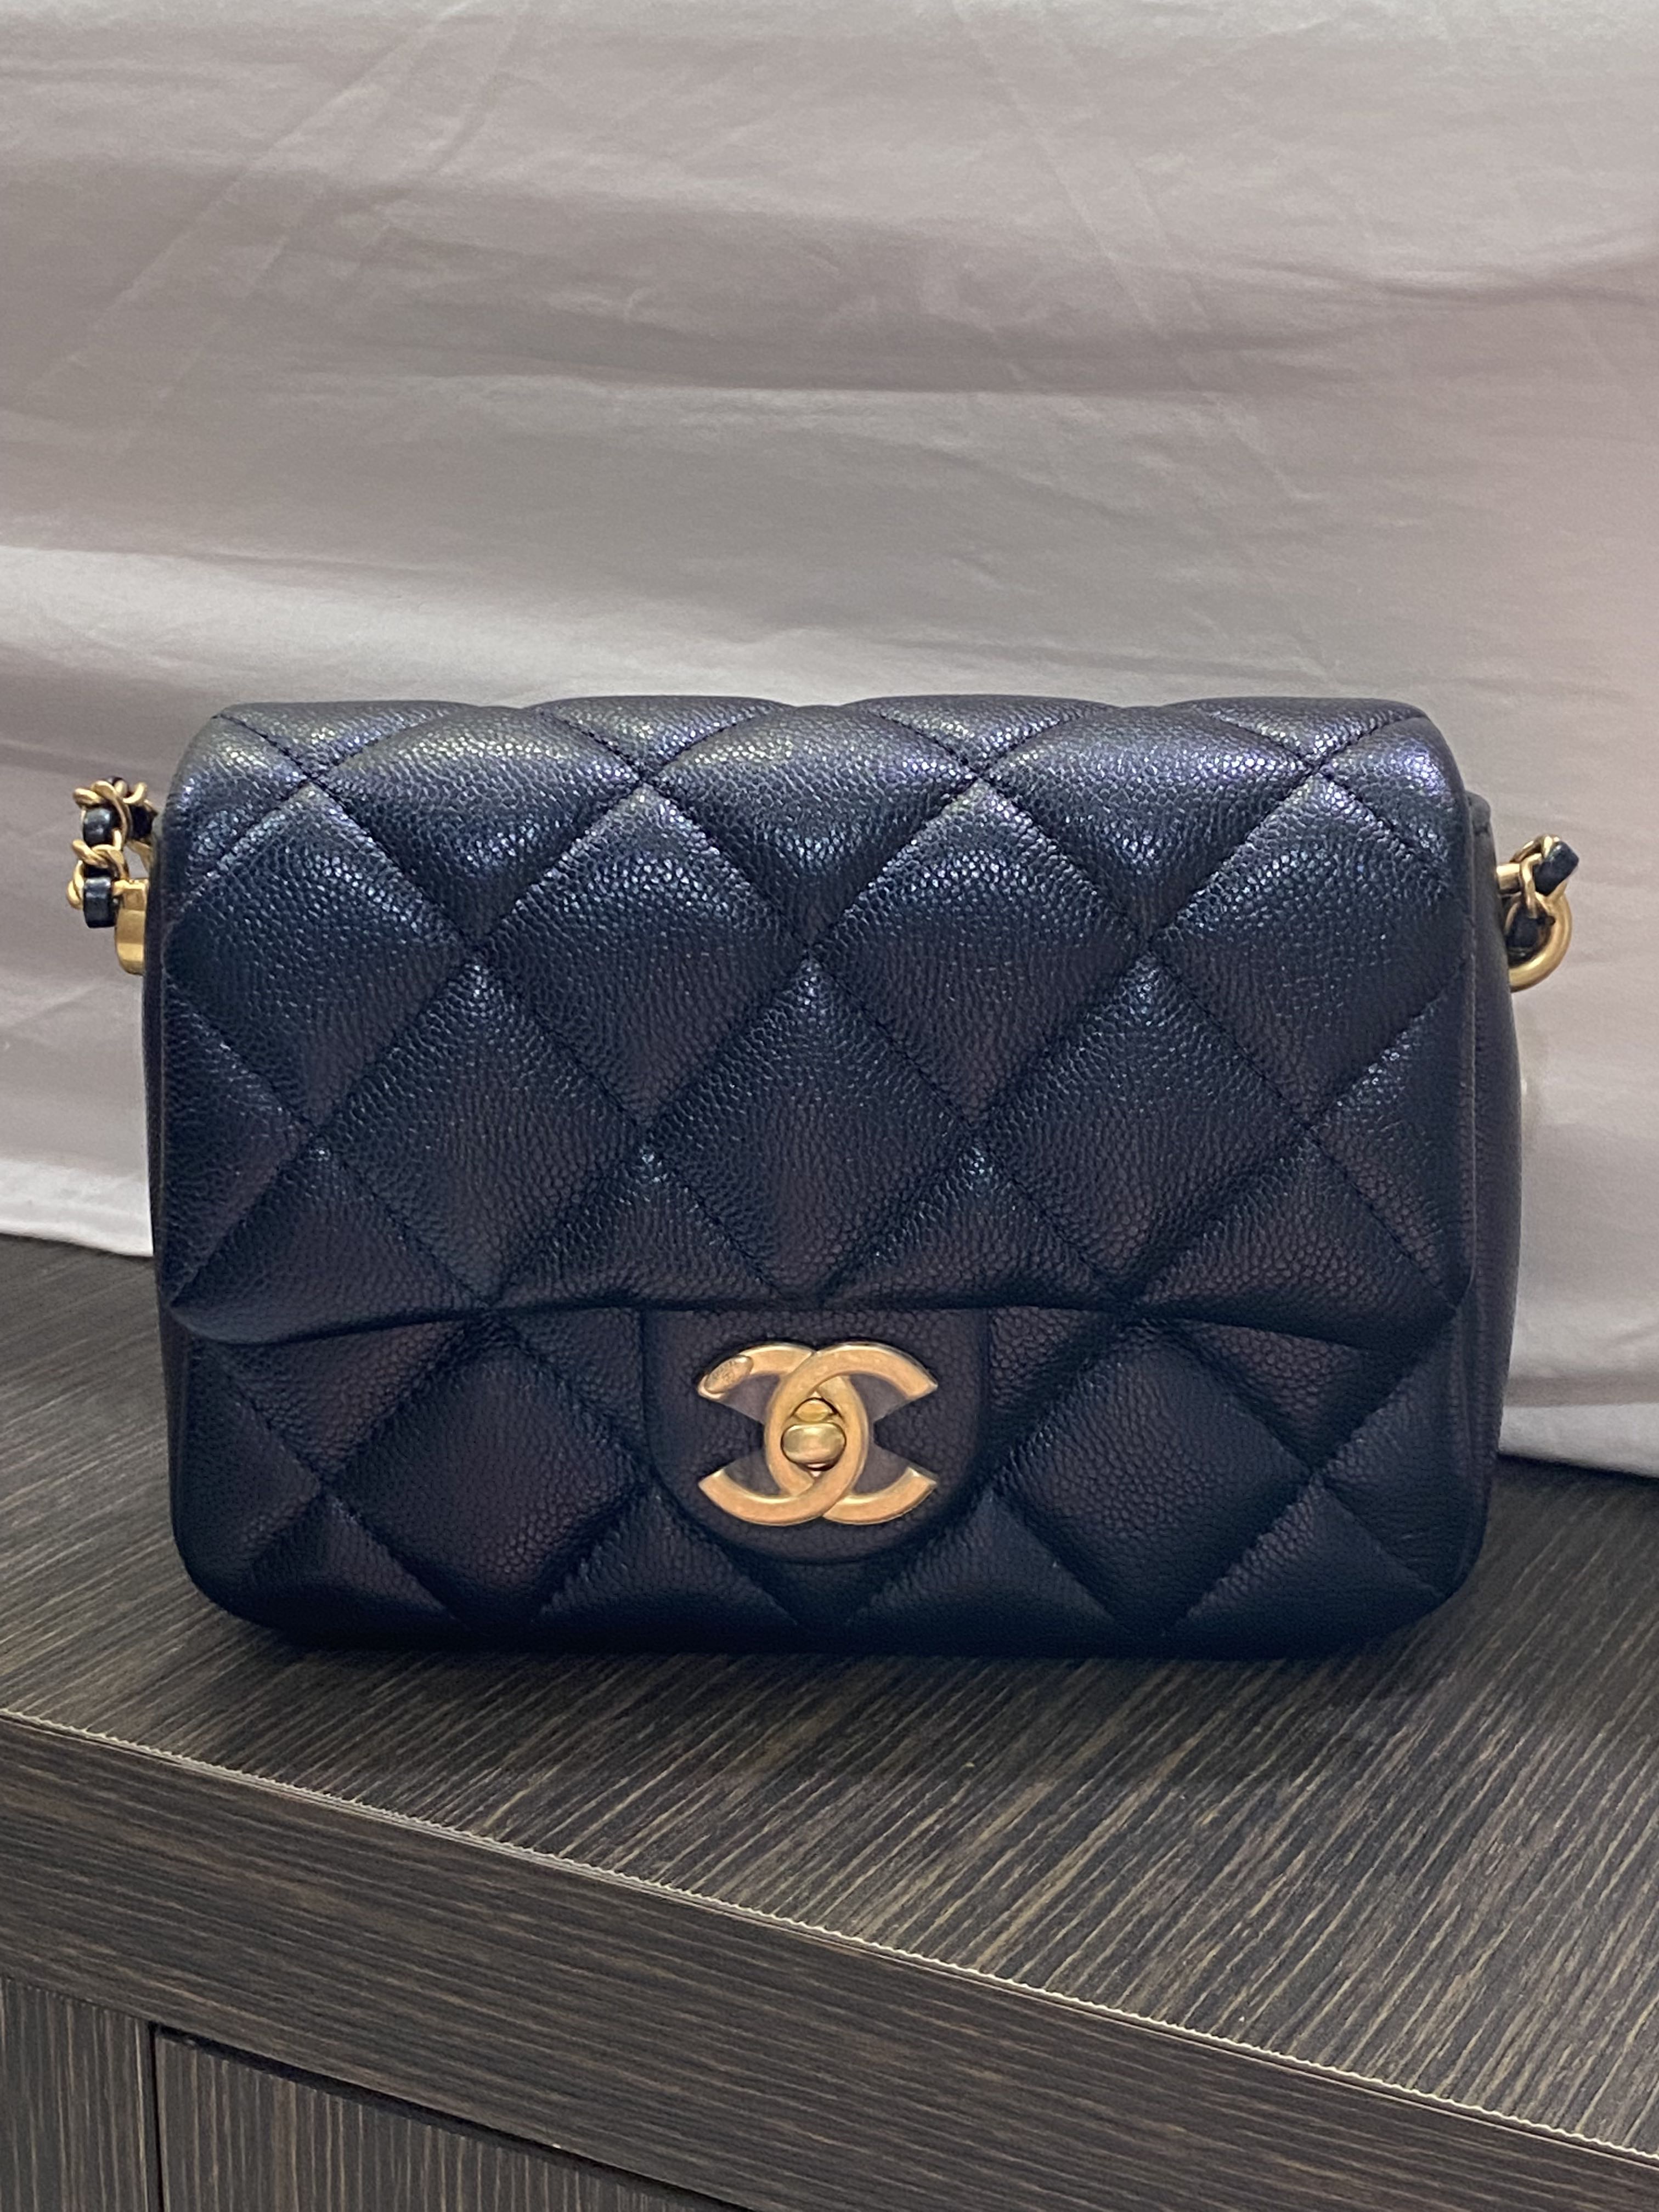 CHANEL 19 Flap Bag - 21A series -Small- FULL SET w/ receipt -Authentic  Microchip